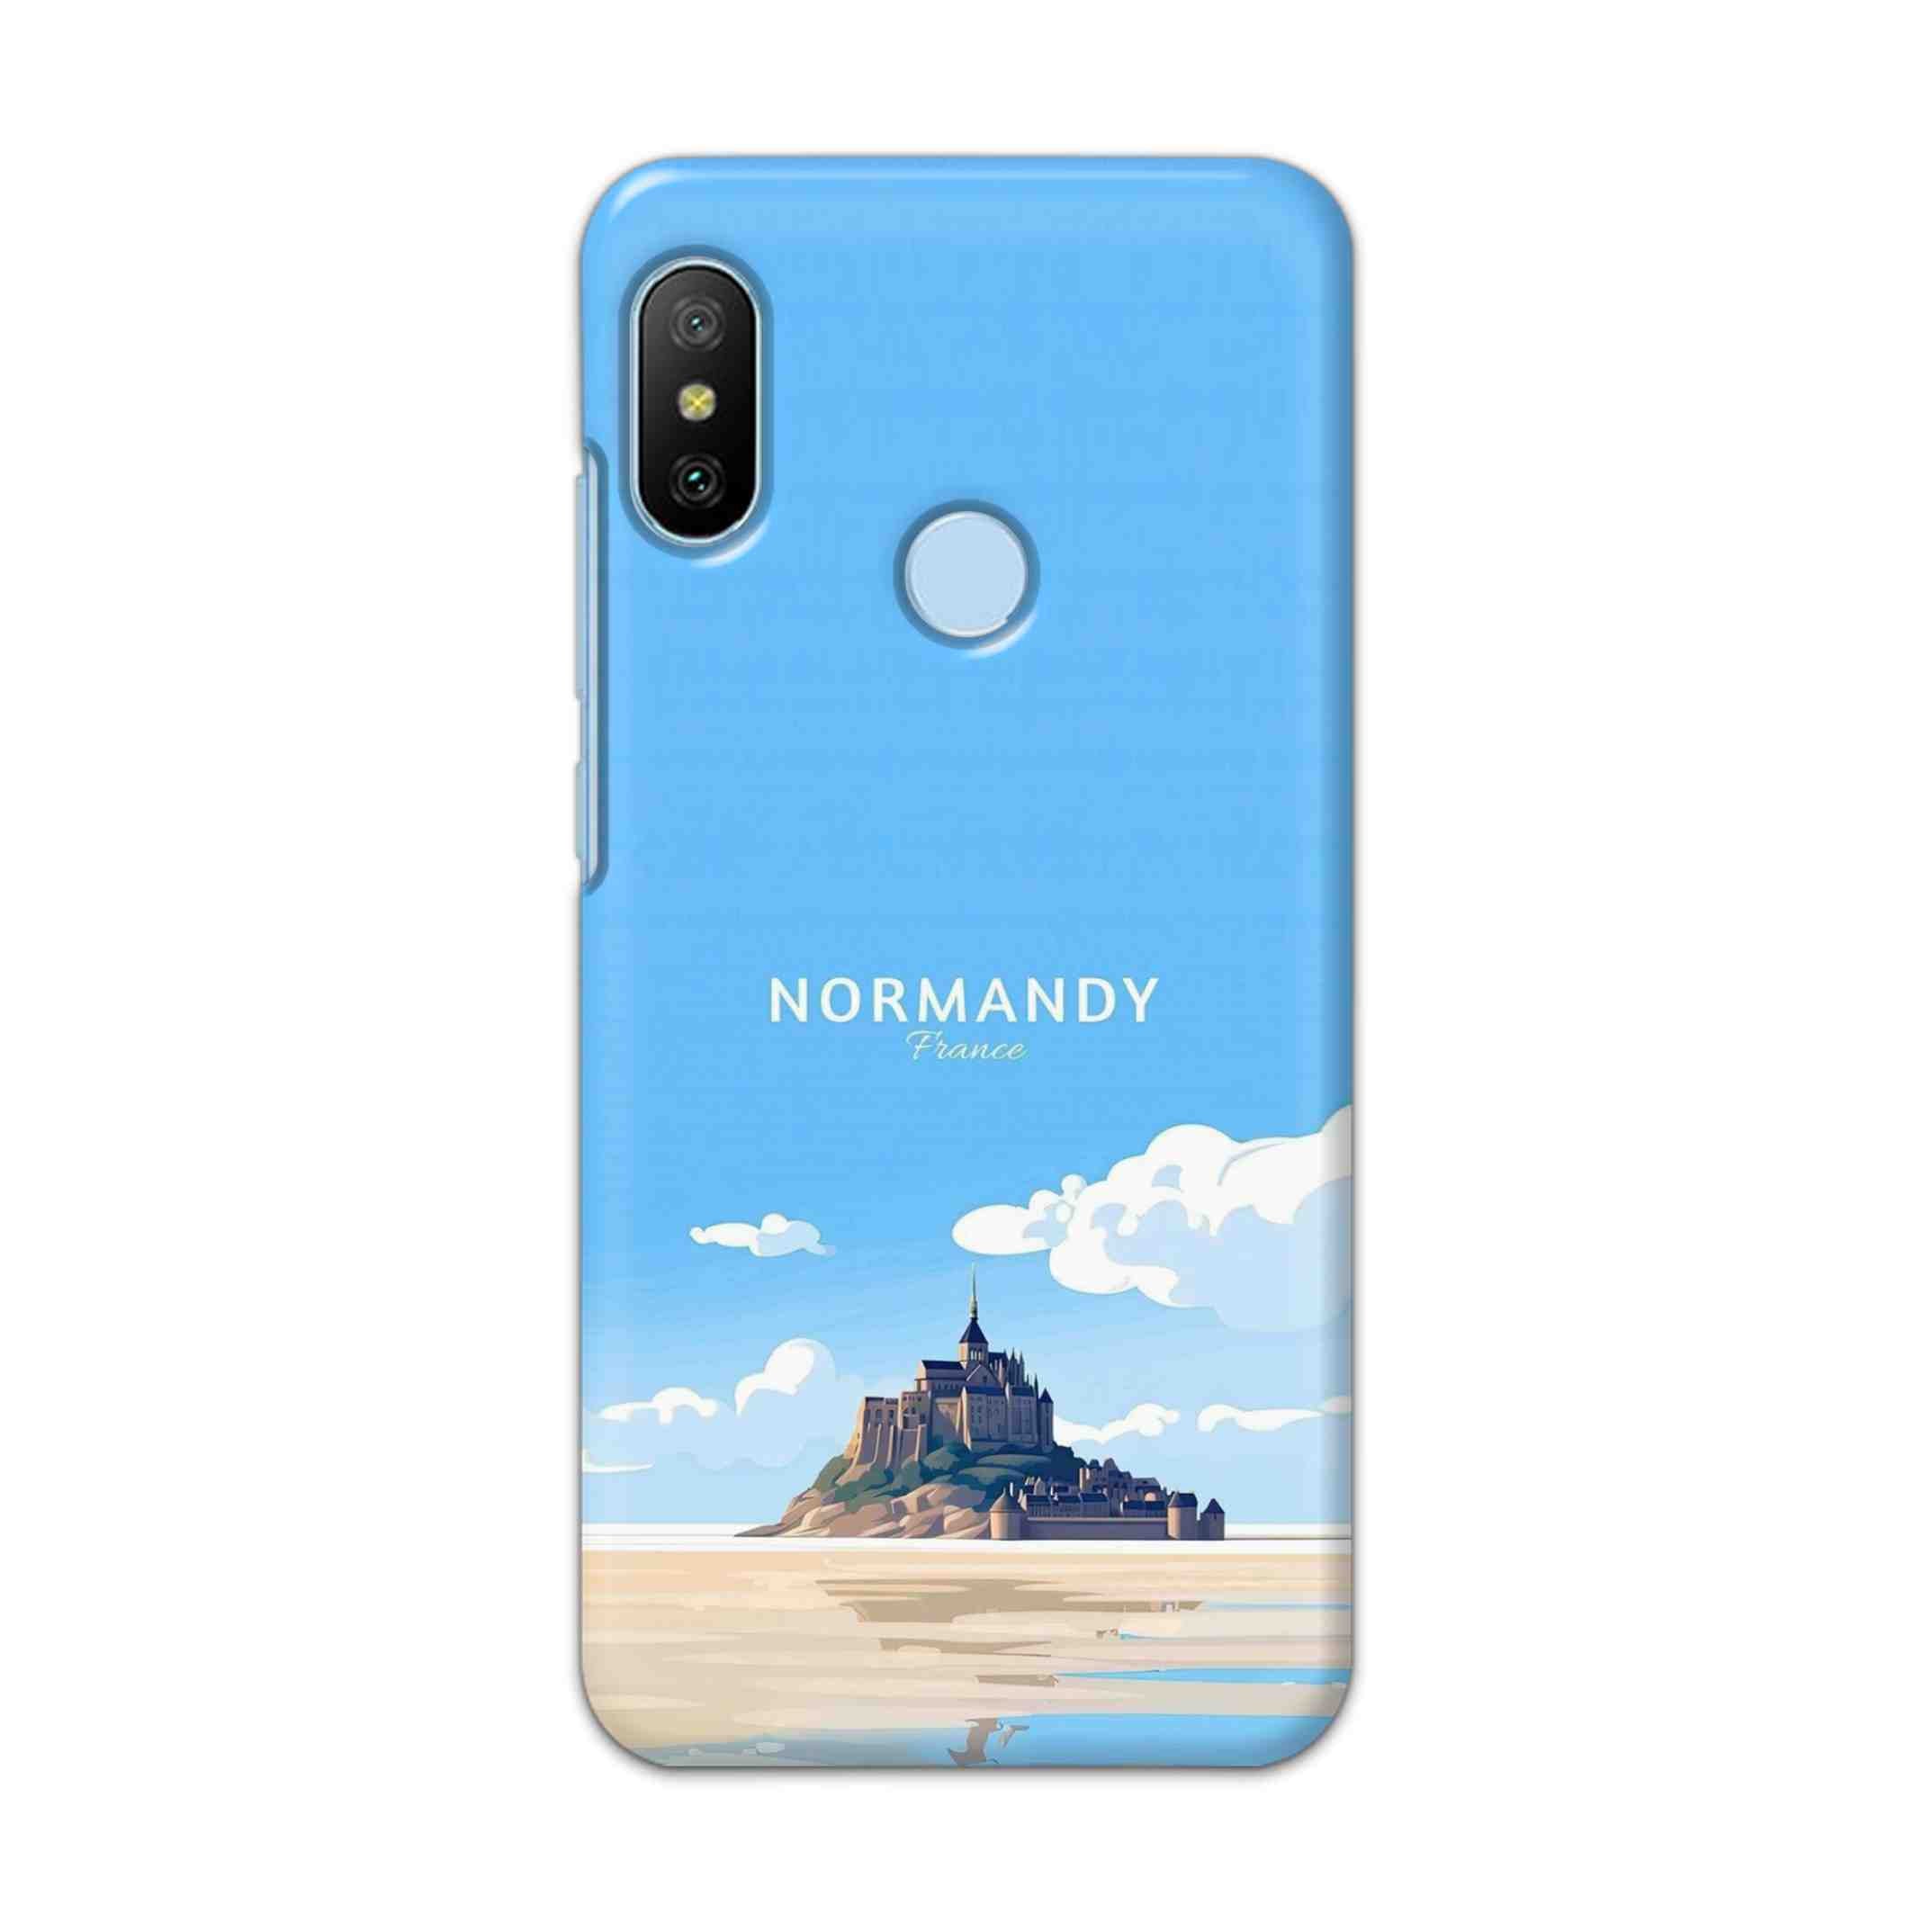 Buy Normandy Hard Back Mobile Phone Case/Cover For Xiaomi A2 / 6X Online